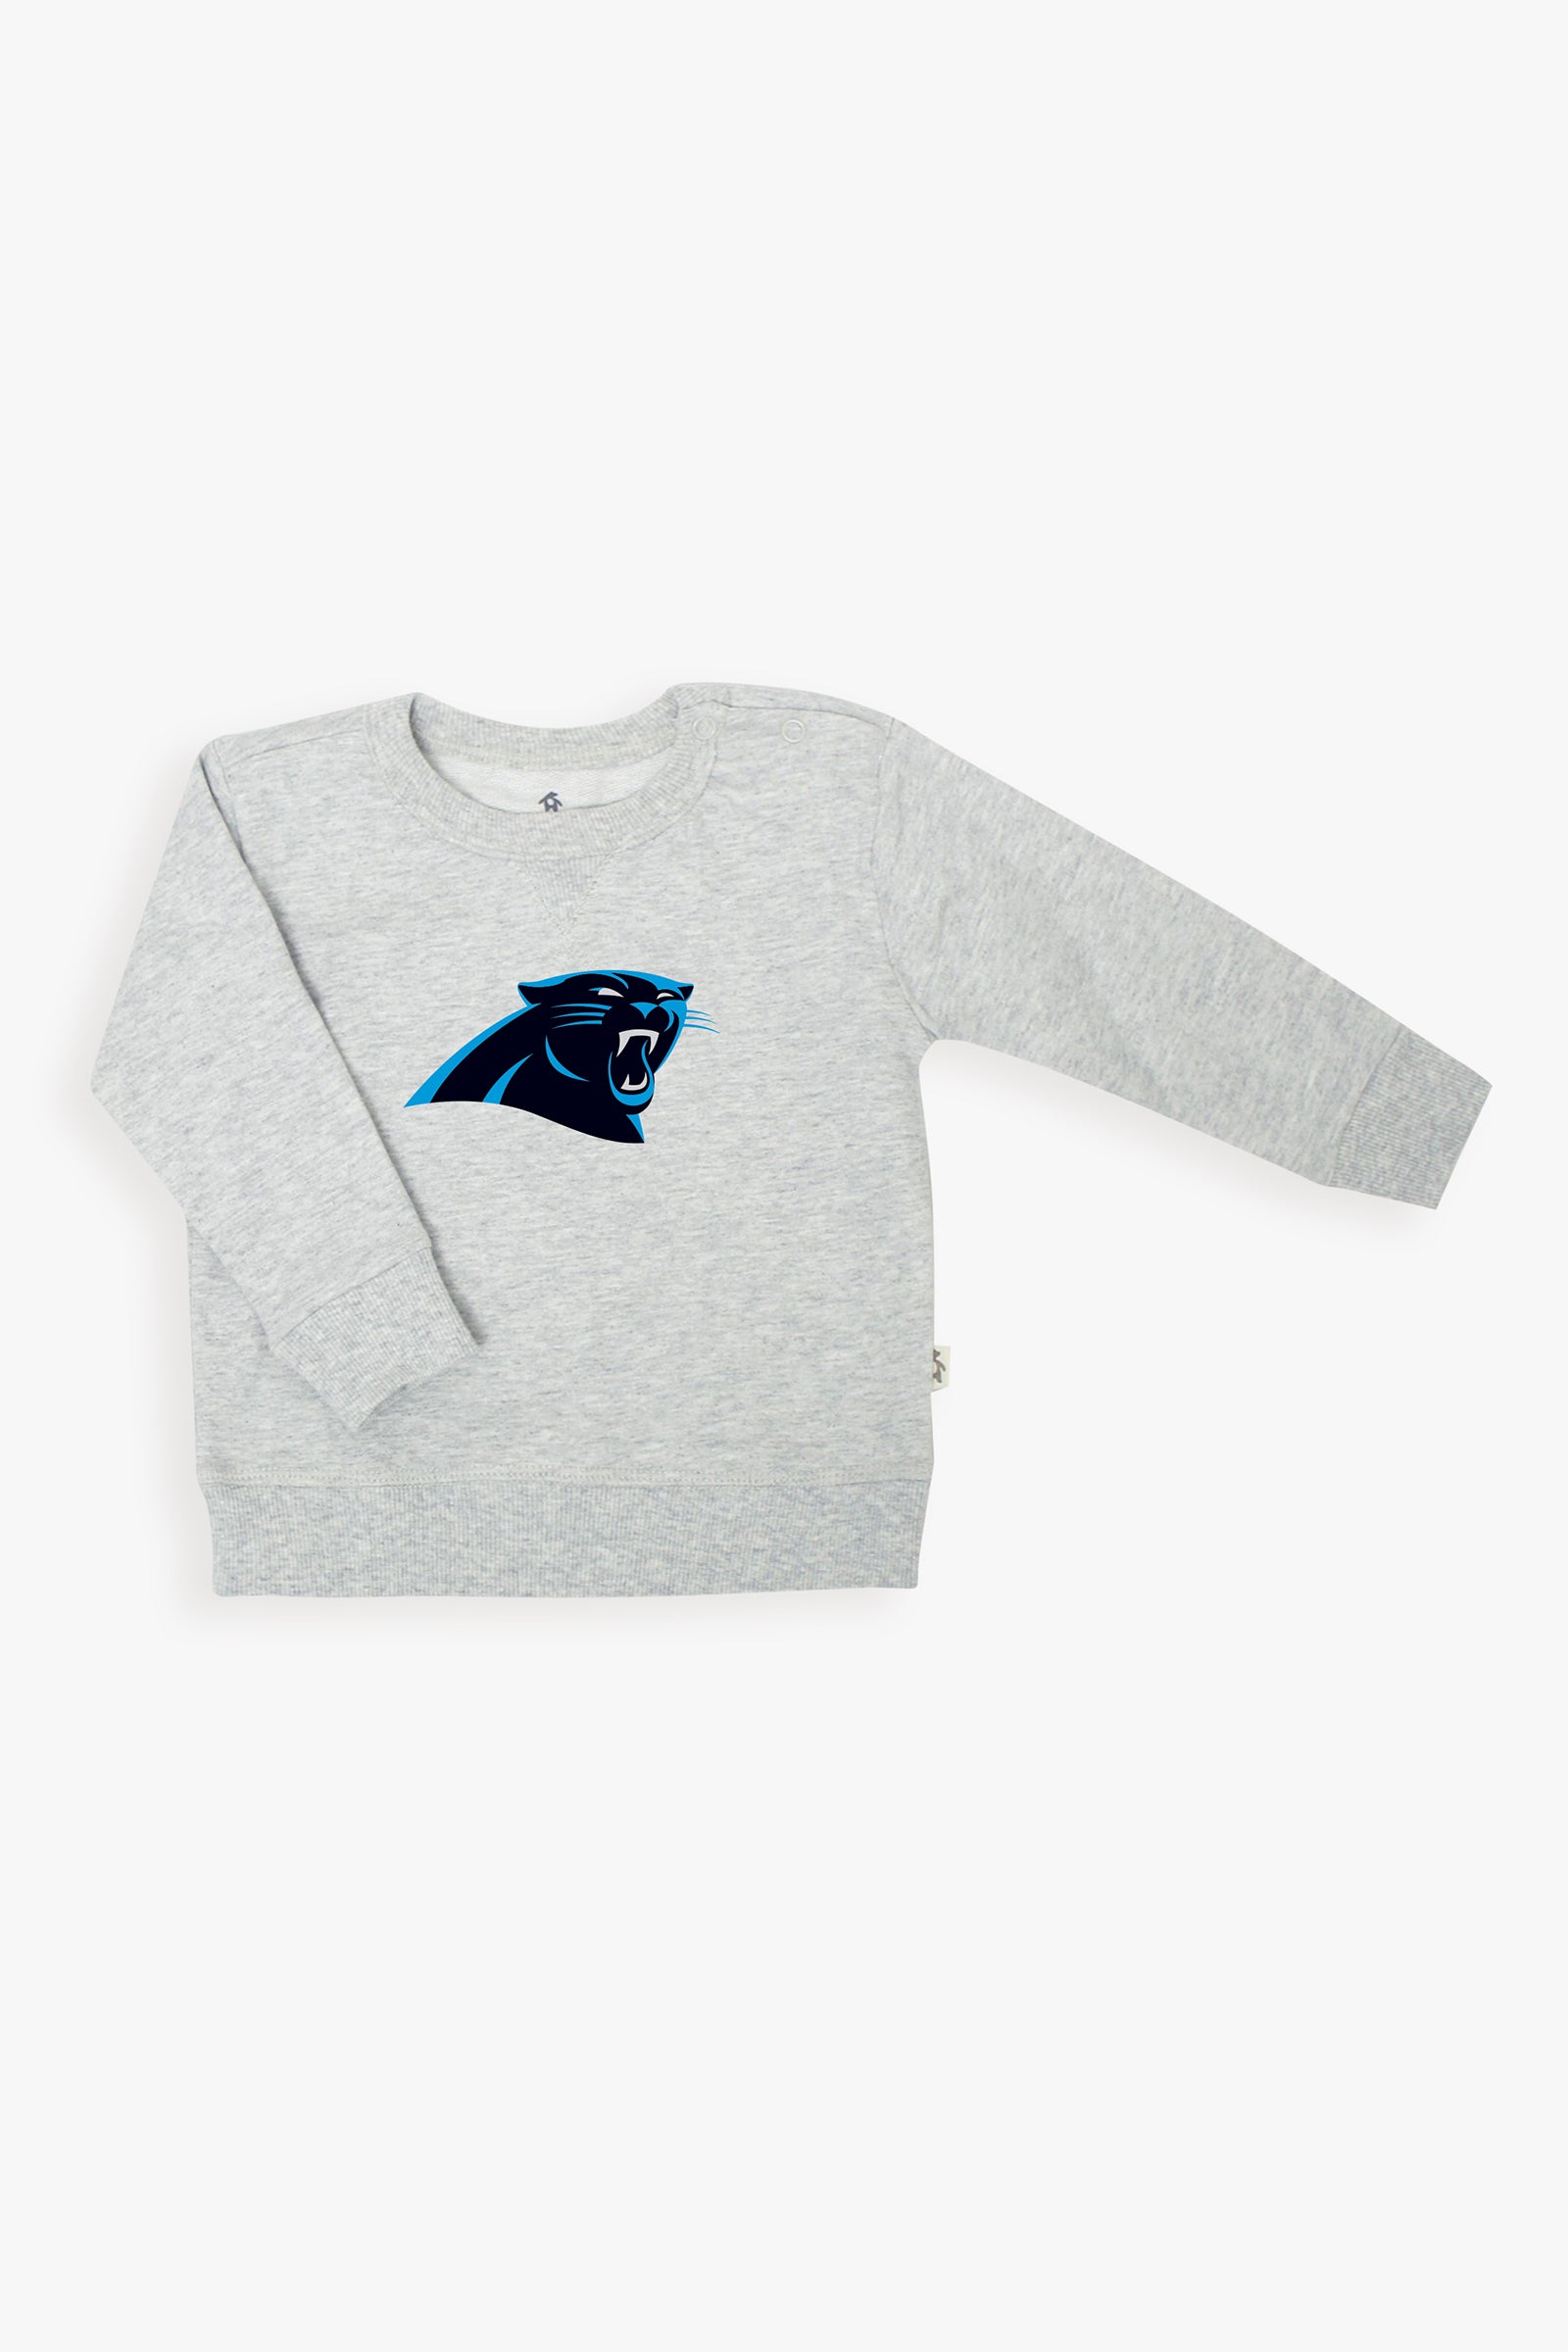 Gertex NFL Toddler French Terry Crewneck Sweater in Grey